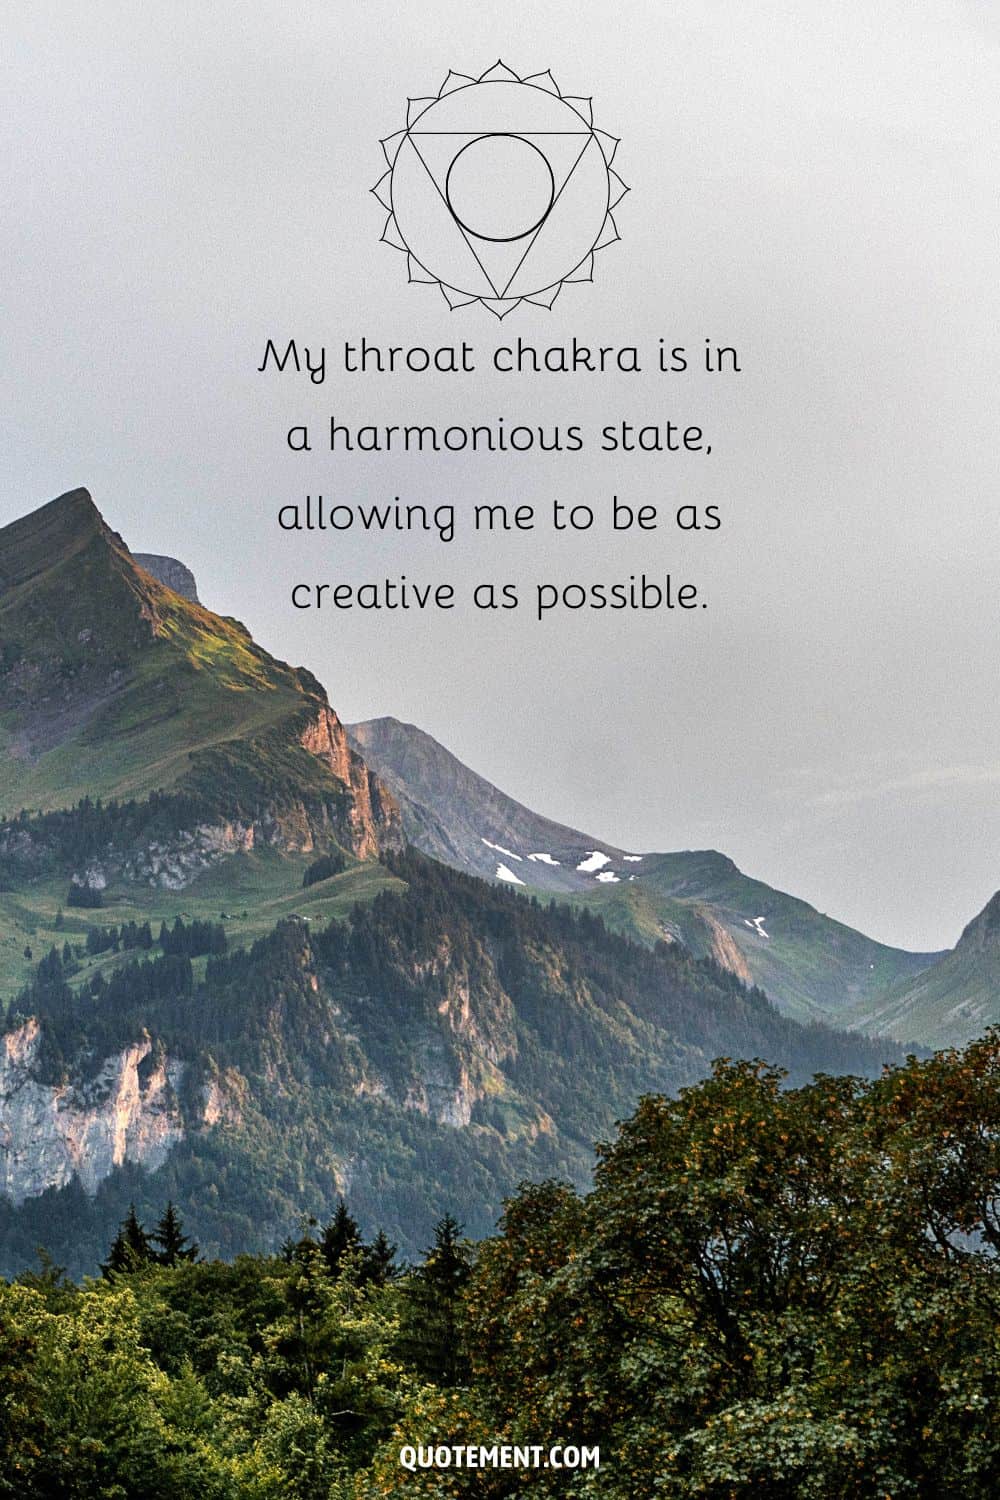 “My throat chakra is in a harmonious state, allowing me to be as creative as possible.”